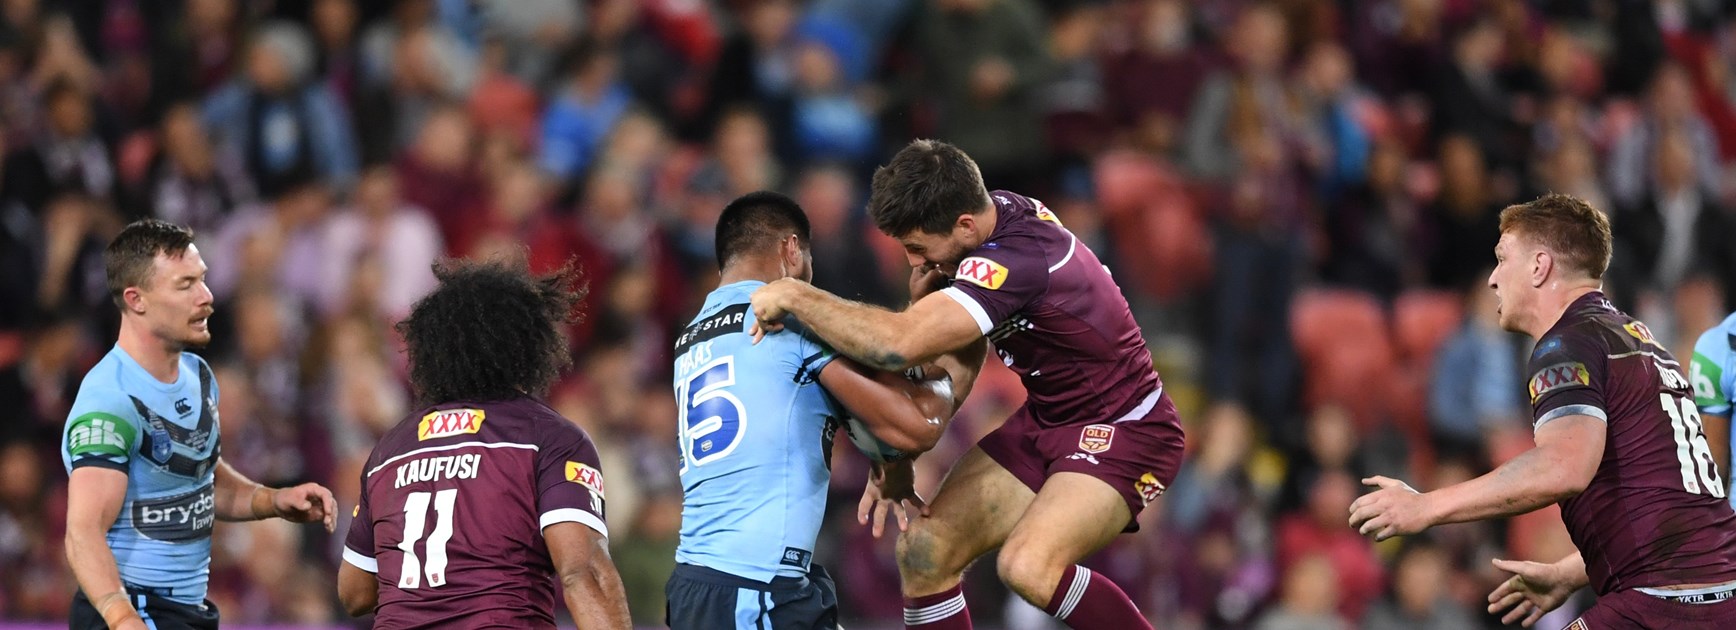 Ben Hunt tries to put the brakes on Payne Haas in Origin I